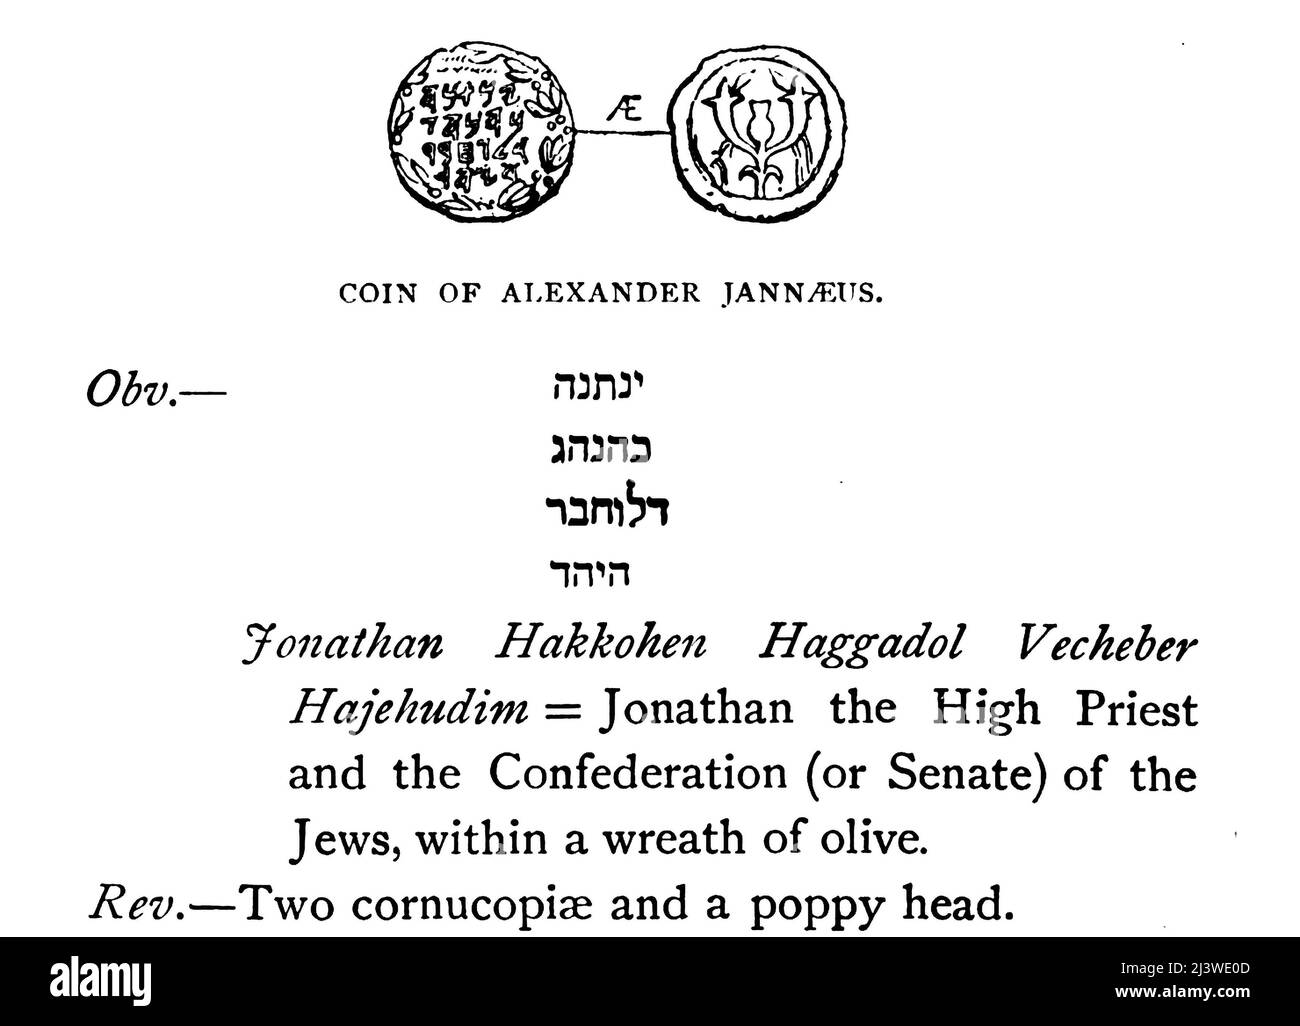 COIN OF ALEXANDER JANNAEUS (the second king of the Hasmonean dynasty) Obv. Jonathan Hakkohen Haggadol Vecheber Hajehudim [Jonathan the High Priest and the Confederation (or Senate) of the Jews], within a wreath of olive. Rev. Two cornucopiae and a poppy head Illustration of ancient Biblical time coin from the book '  The money of the Bible ' by George Charles Williamson, Publisher: London, The Religious Tract Society 1894 Stock Photo